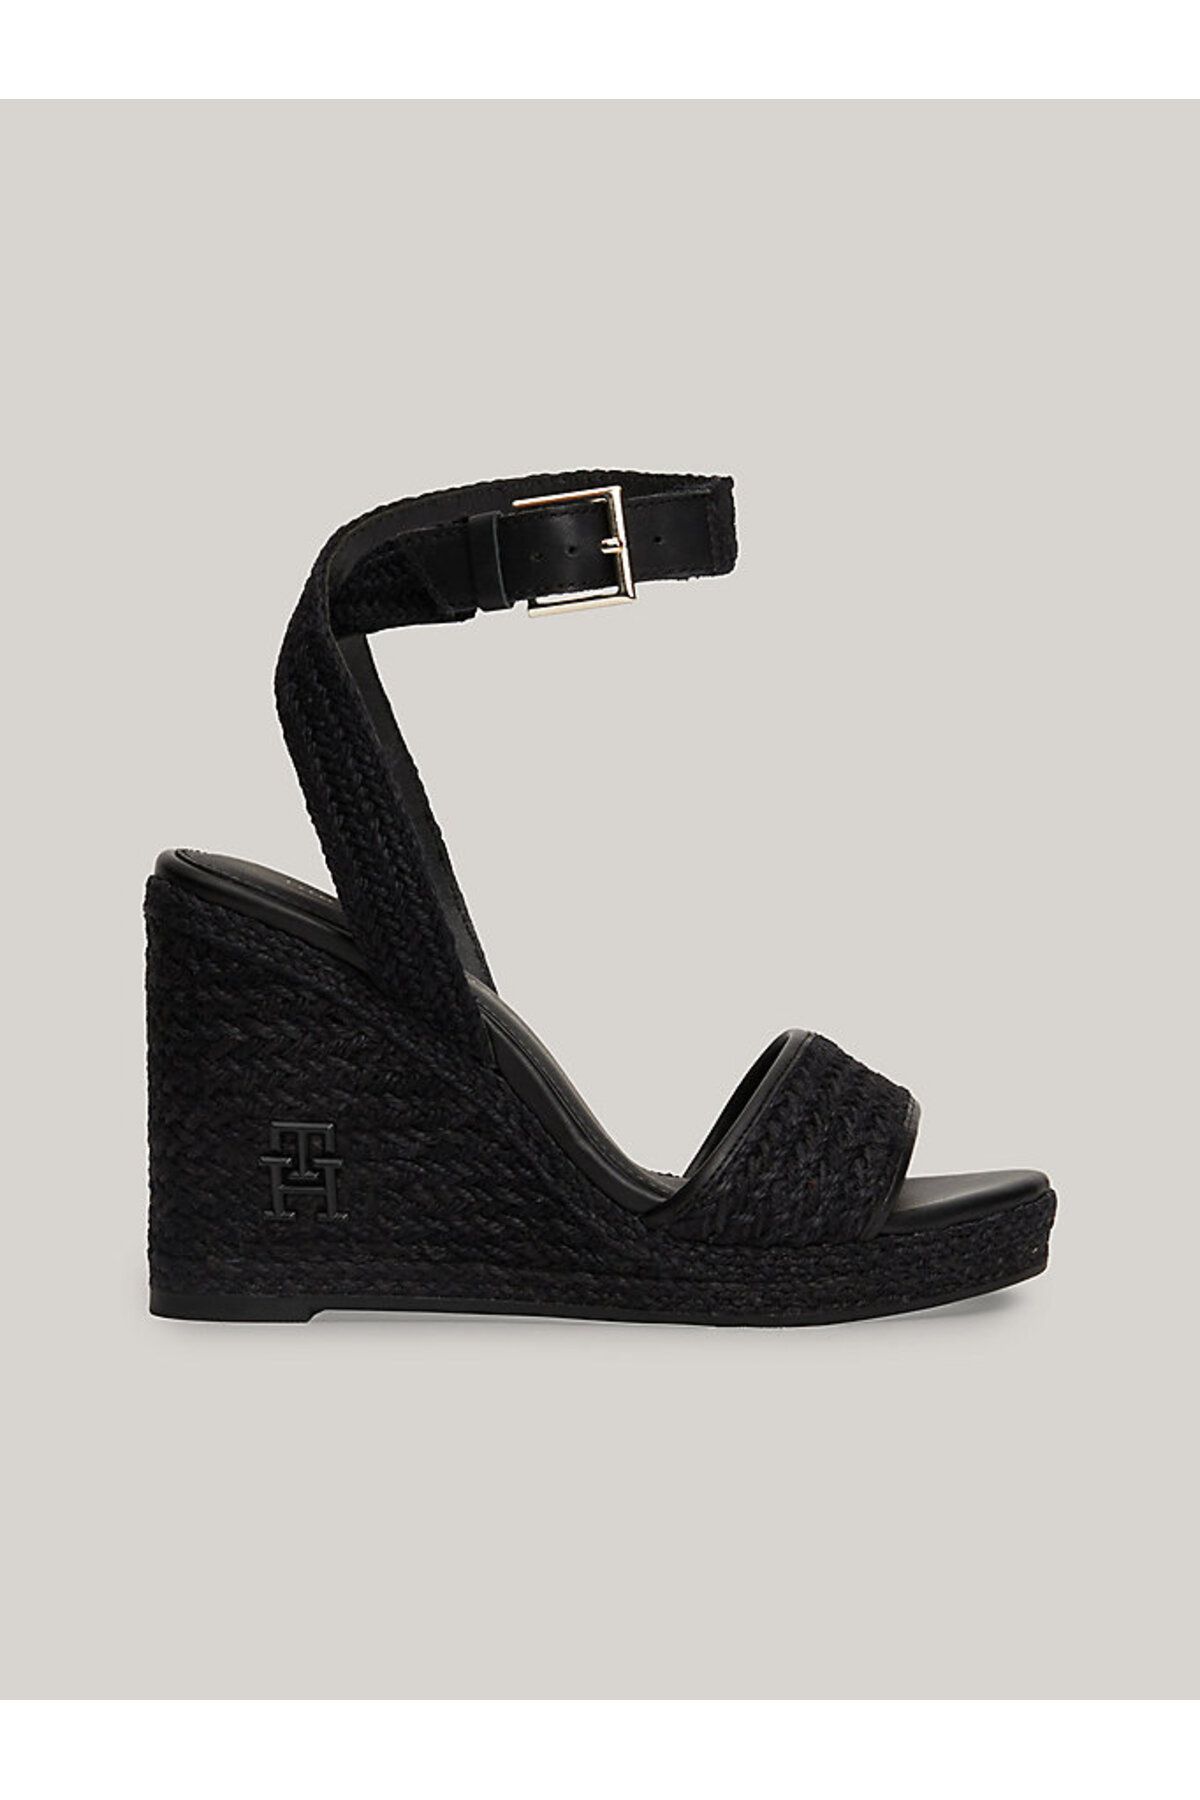 Tommy Hilfiger TH ROPE HIGH WEDGE SANDAL